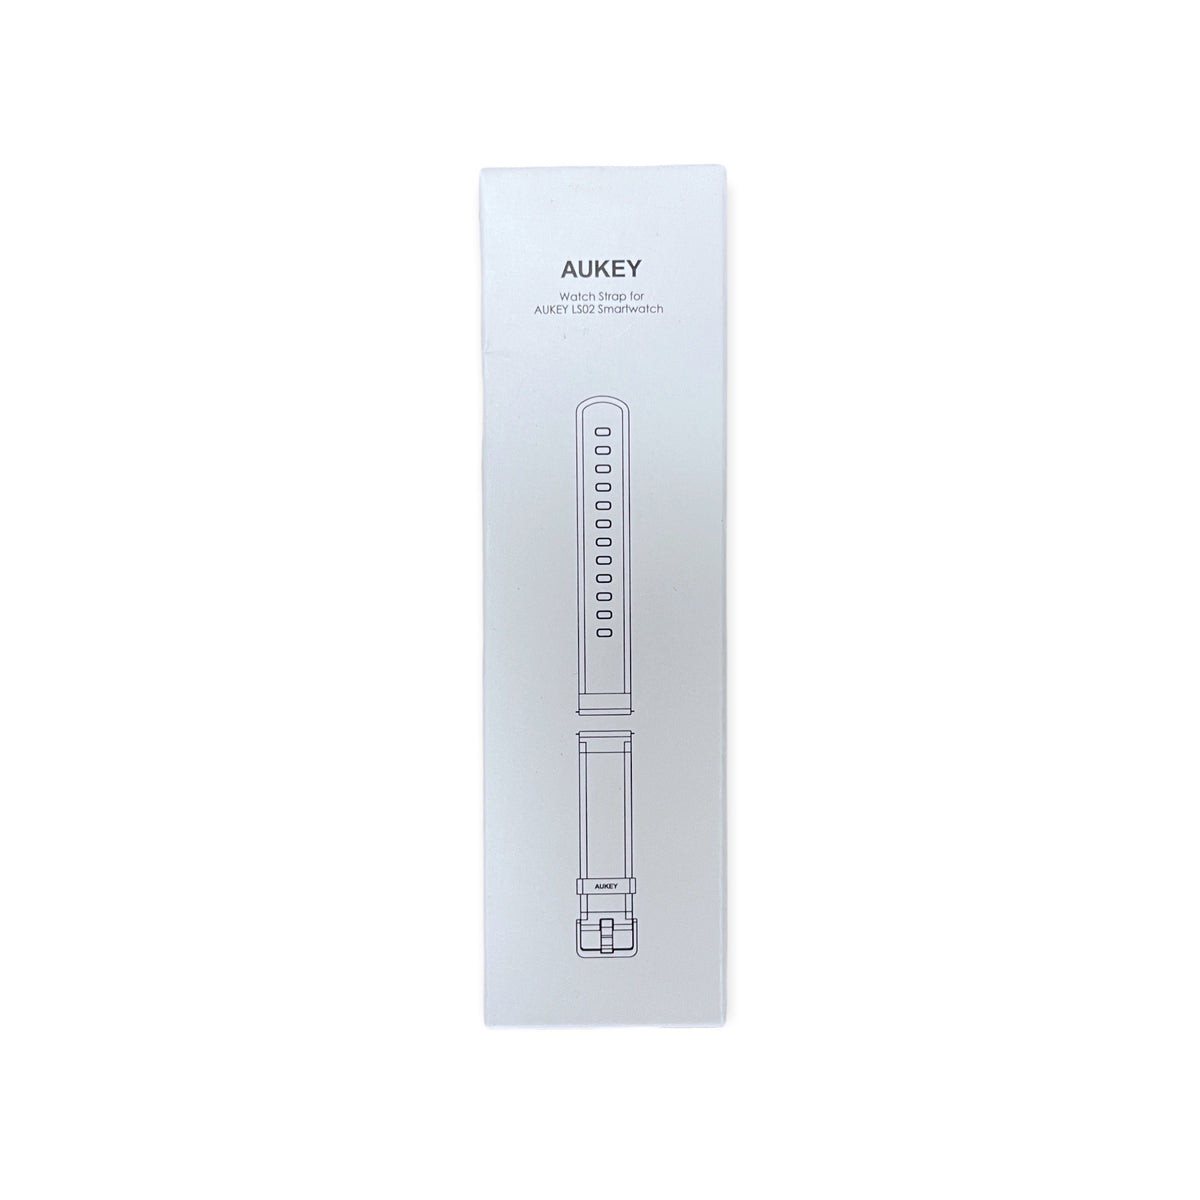 Accesorios AUKEY ls02 smart watch band - blanco